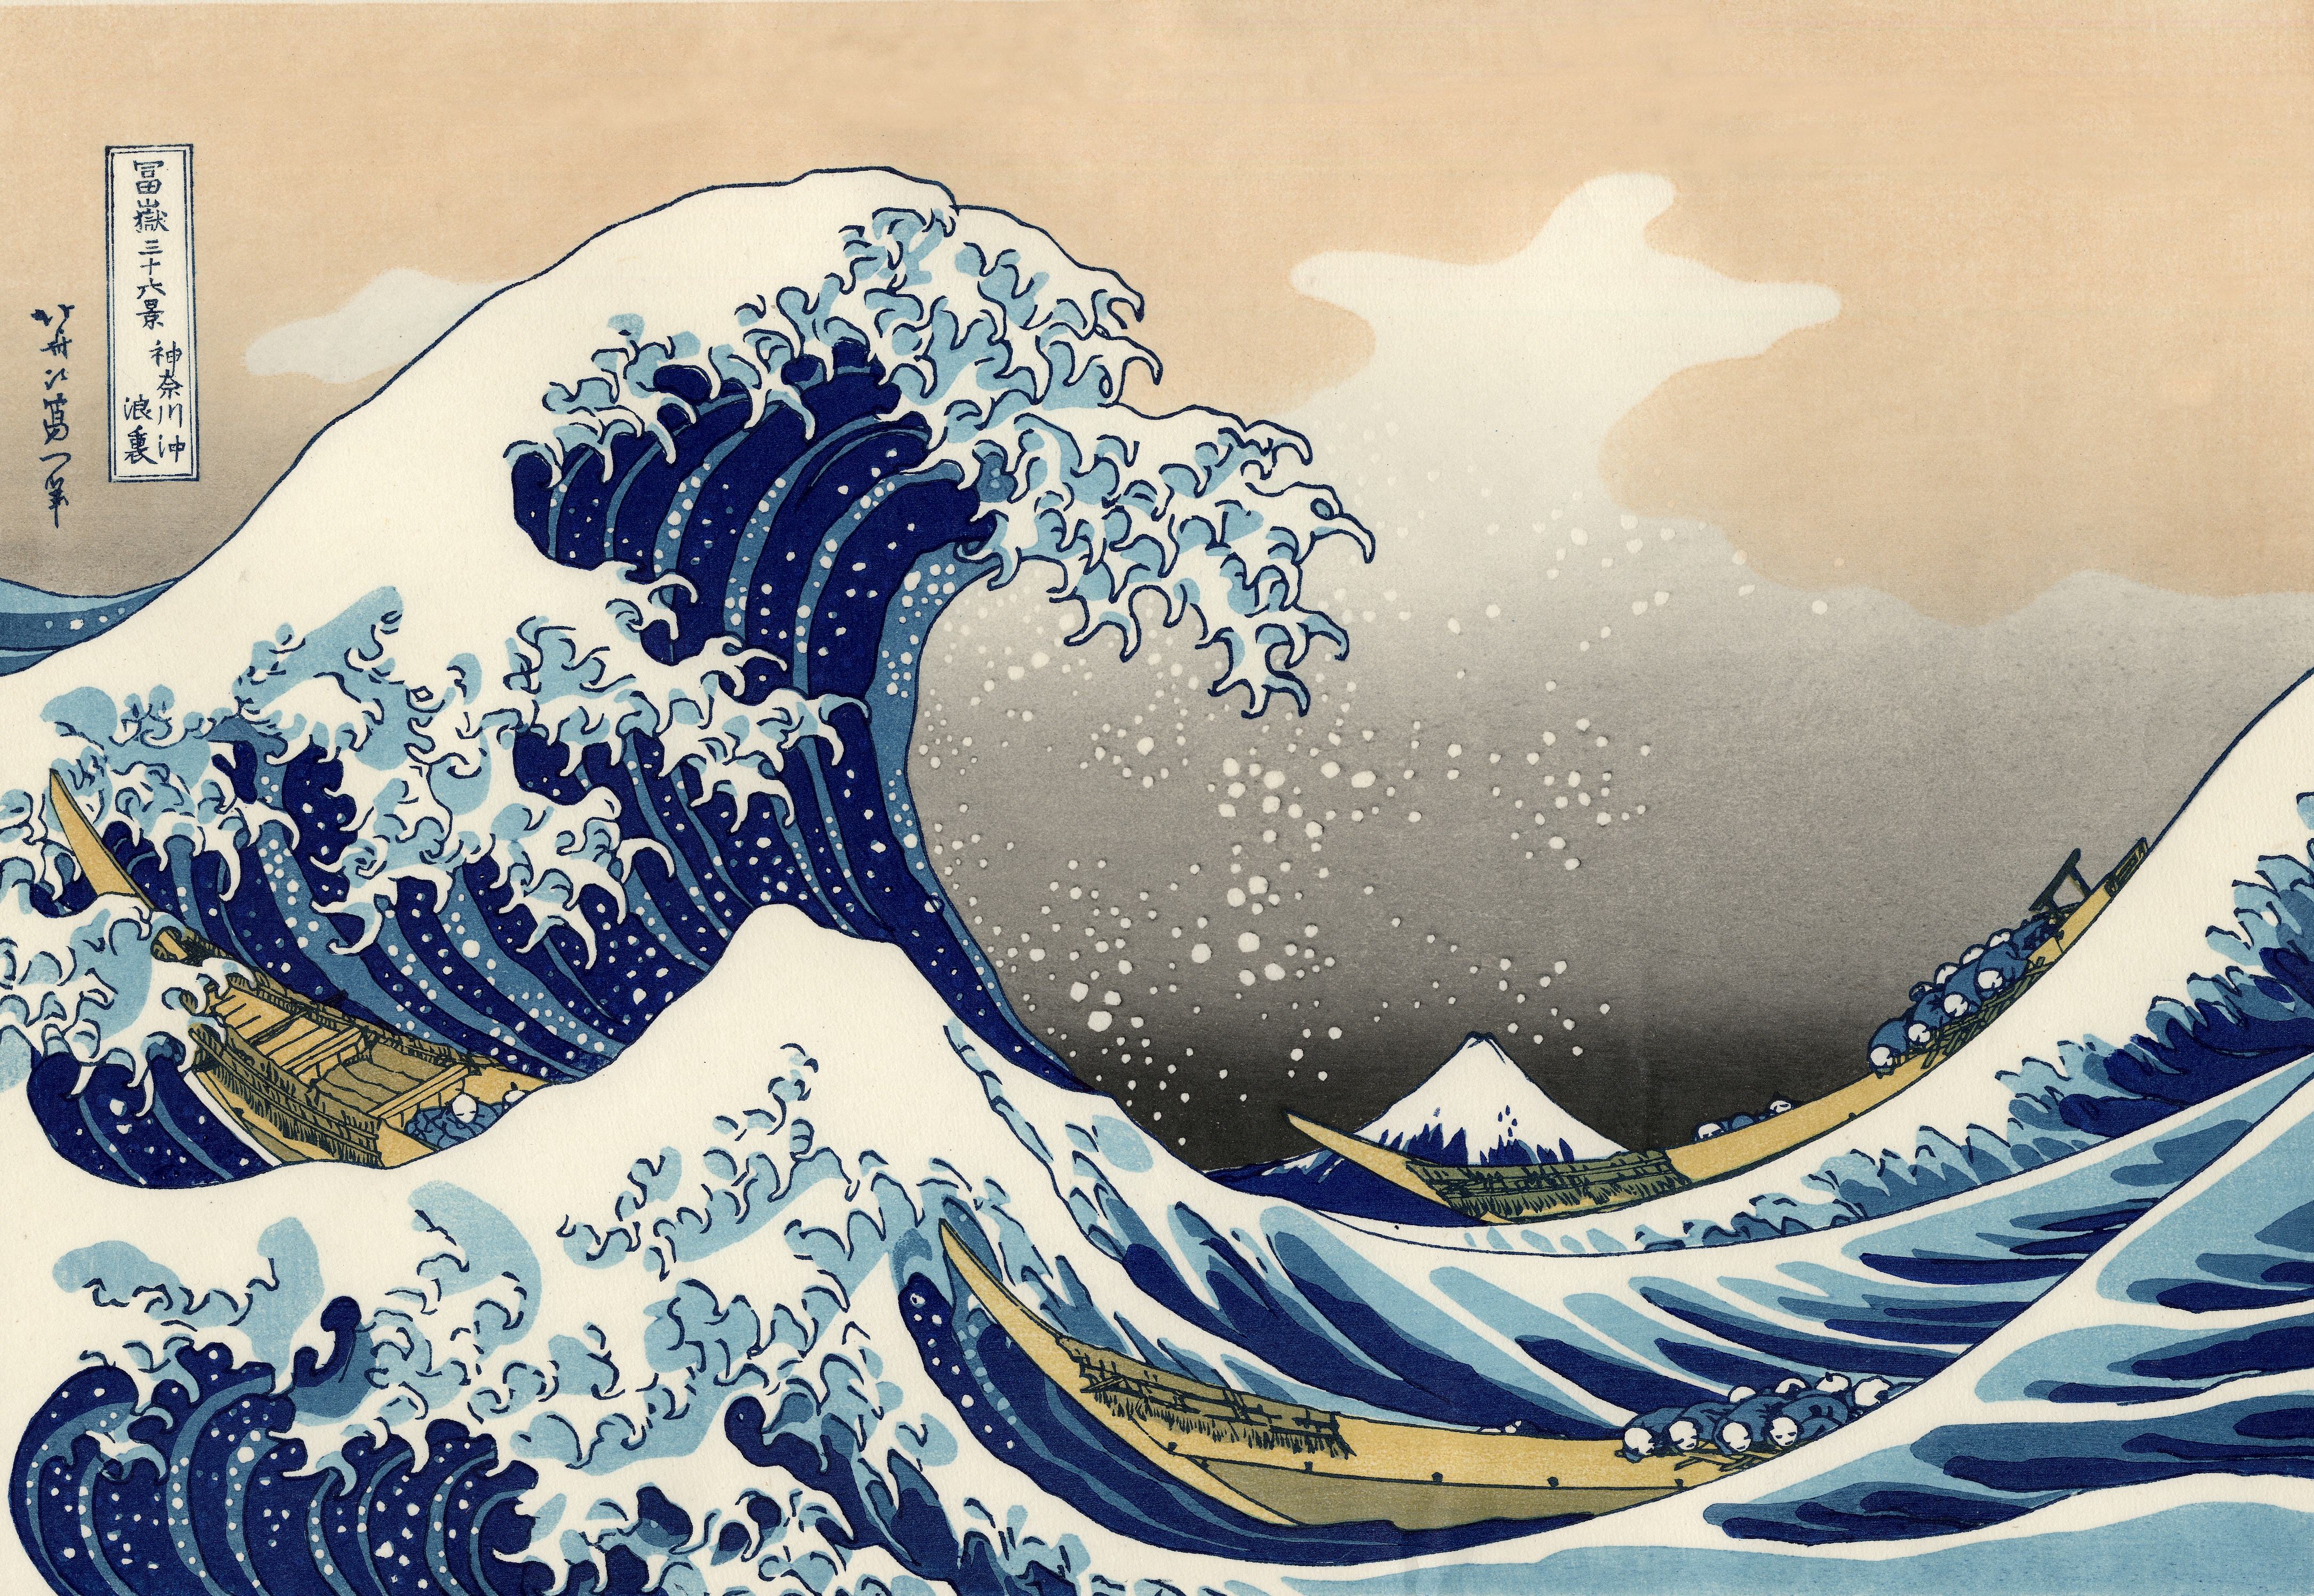 android wave, the great wave off kanagawa, artistic